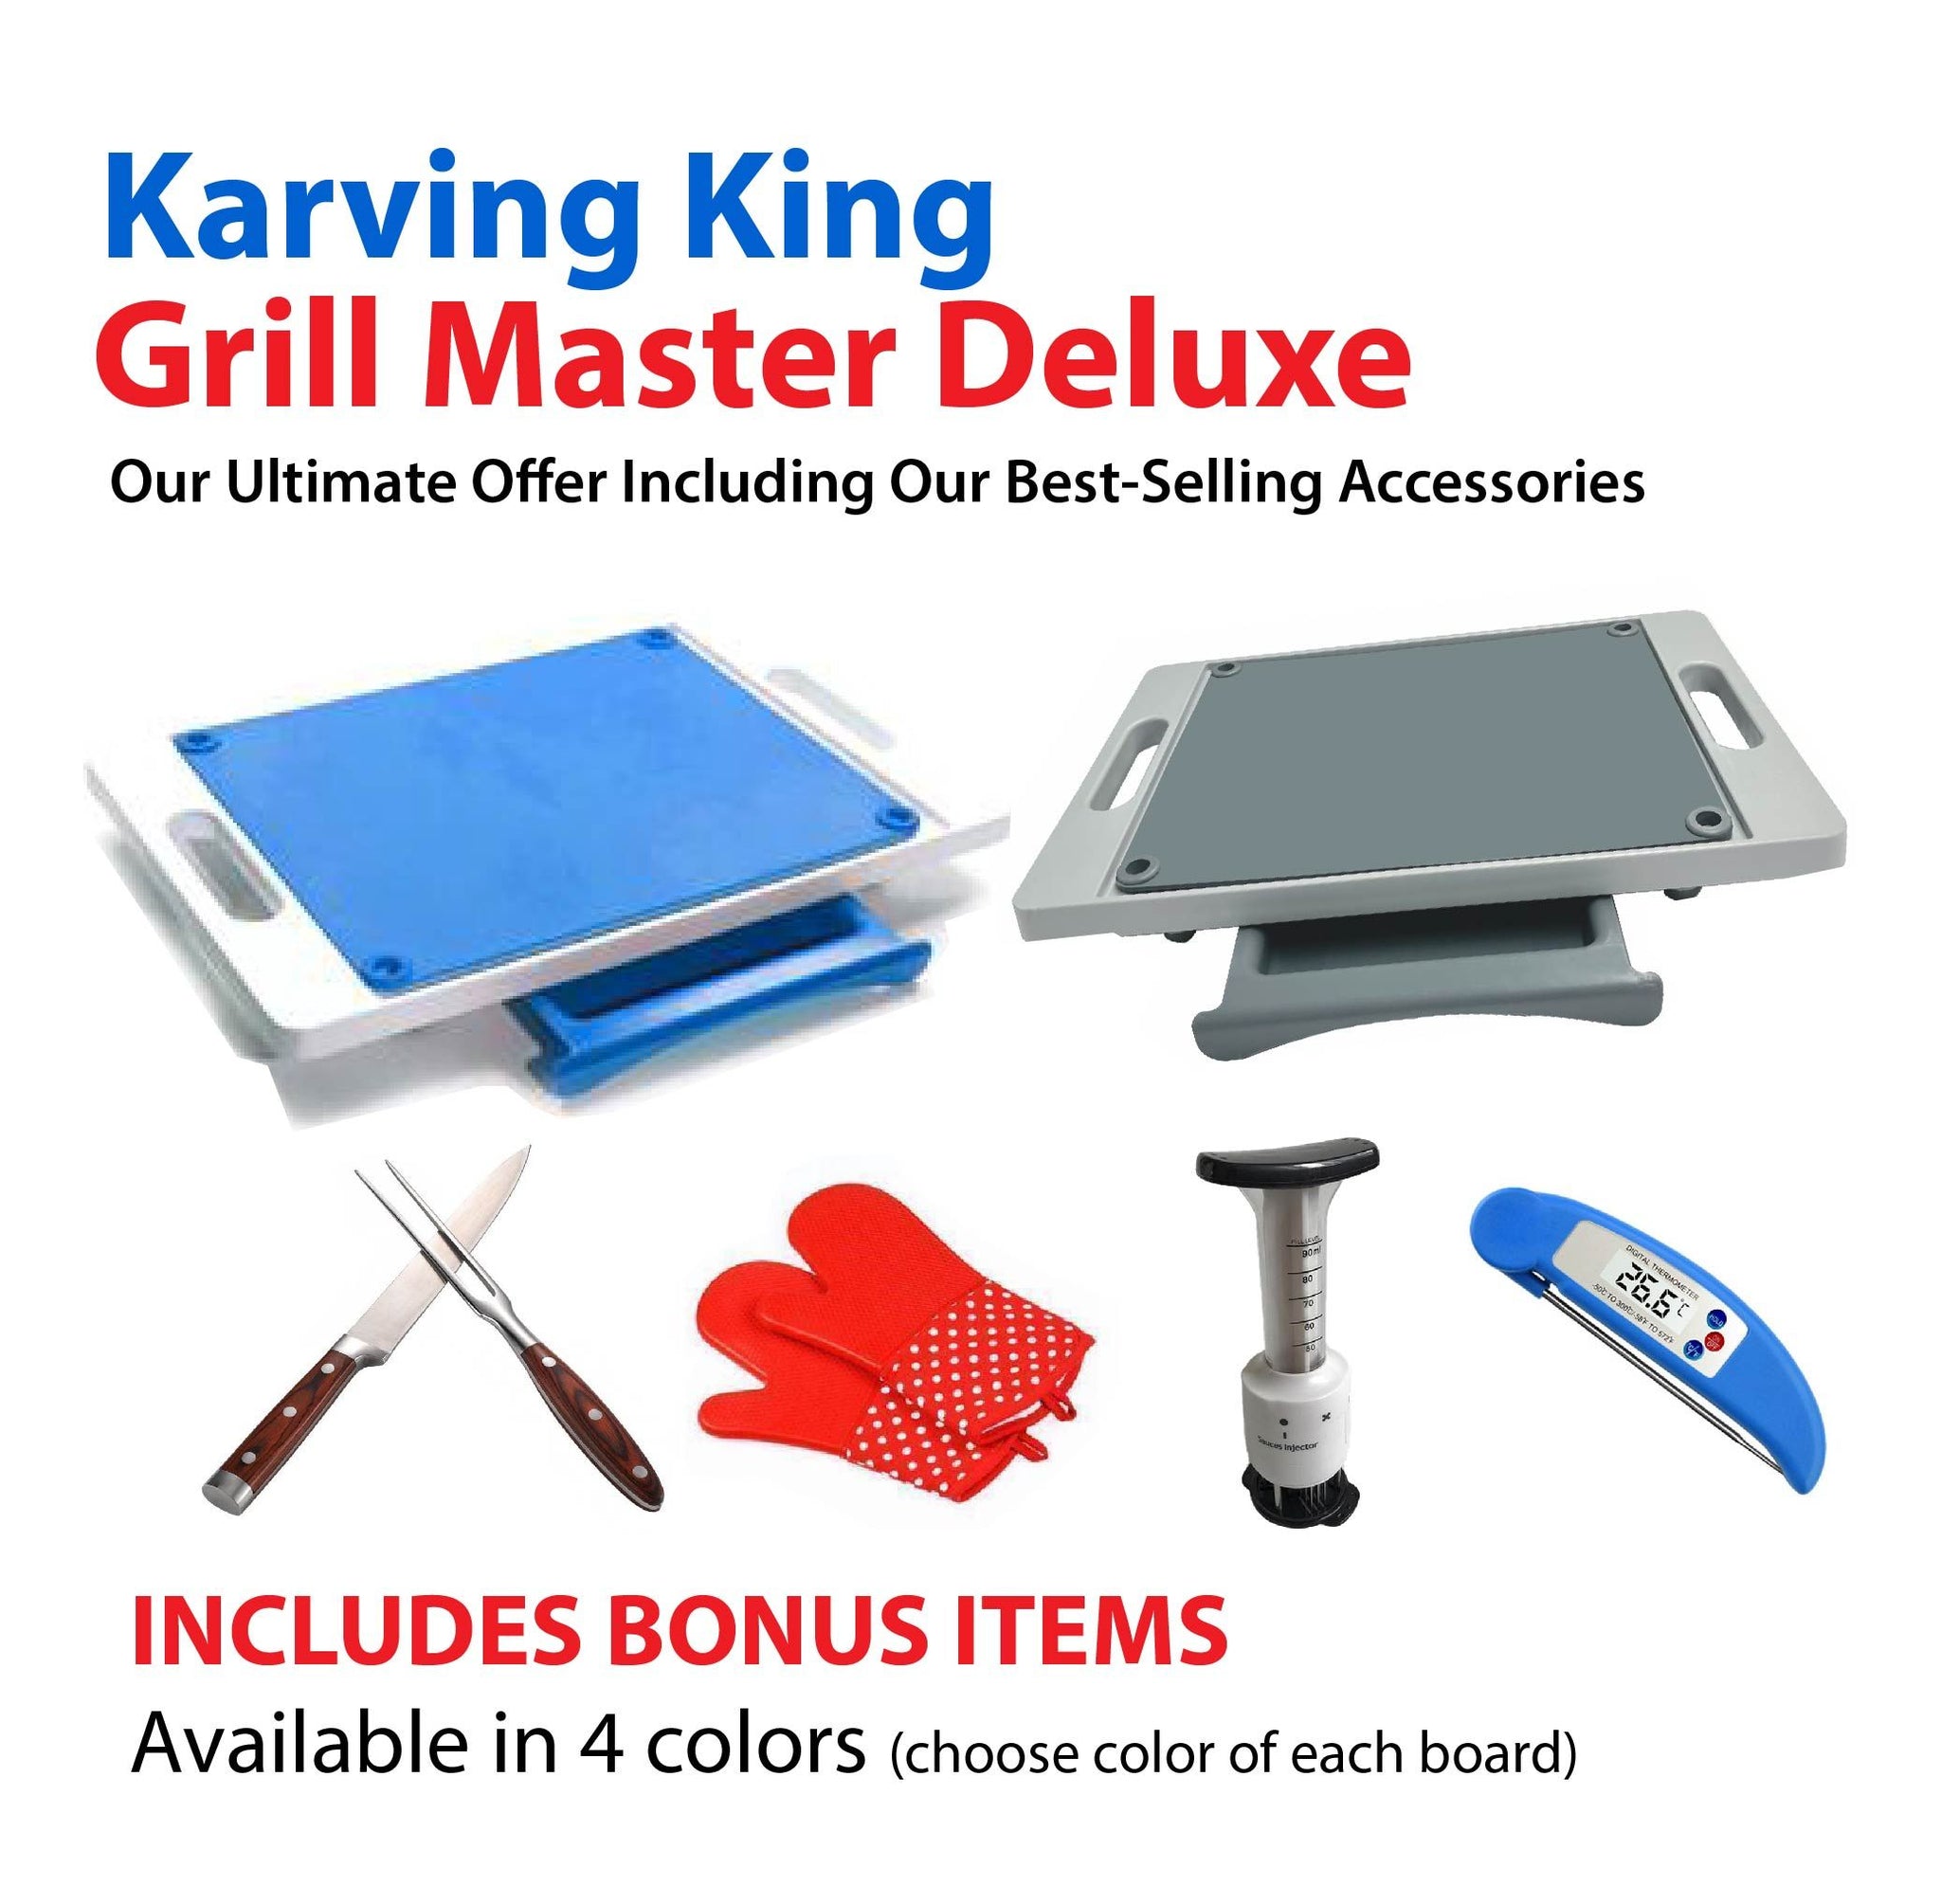 Set of 2 Dripless Cutting Boards 2 In 1 System With Digital Meat Thermometer, Professional Carving Set, Meat Flavorizer/Tenderizer and Set of 2 Silicone Oven Mitts